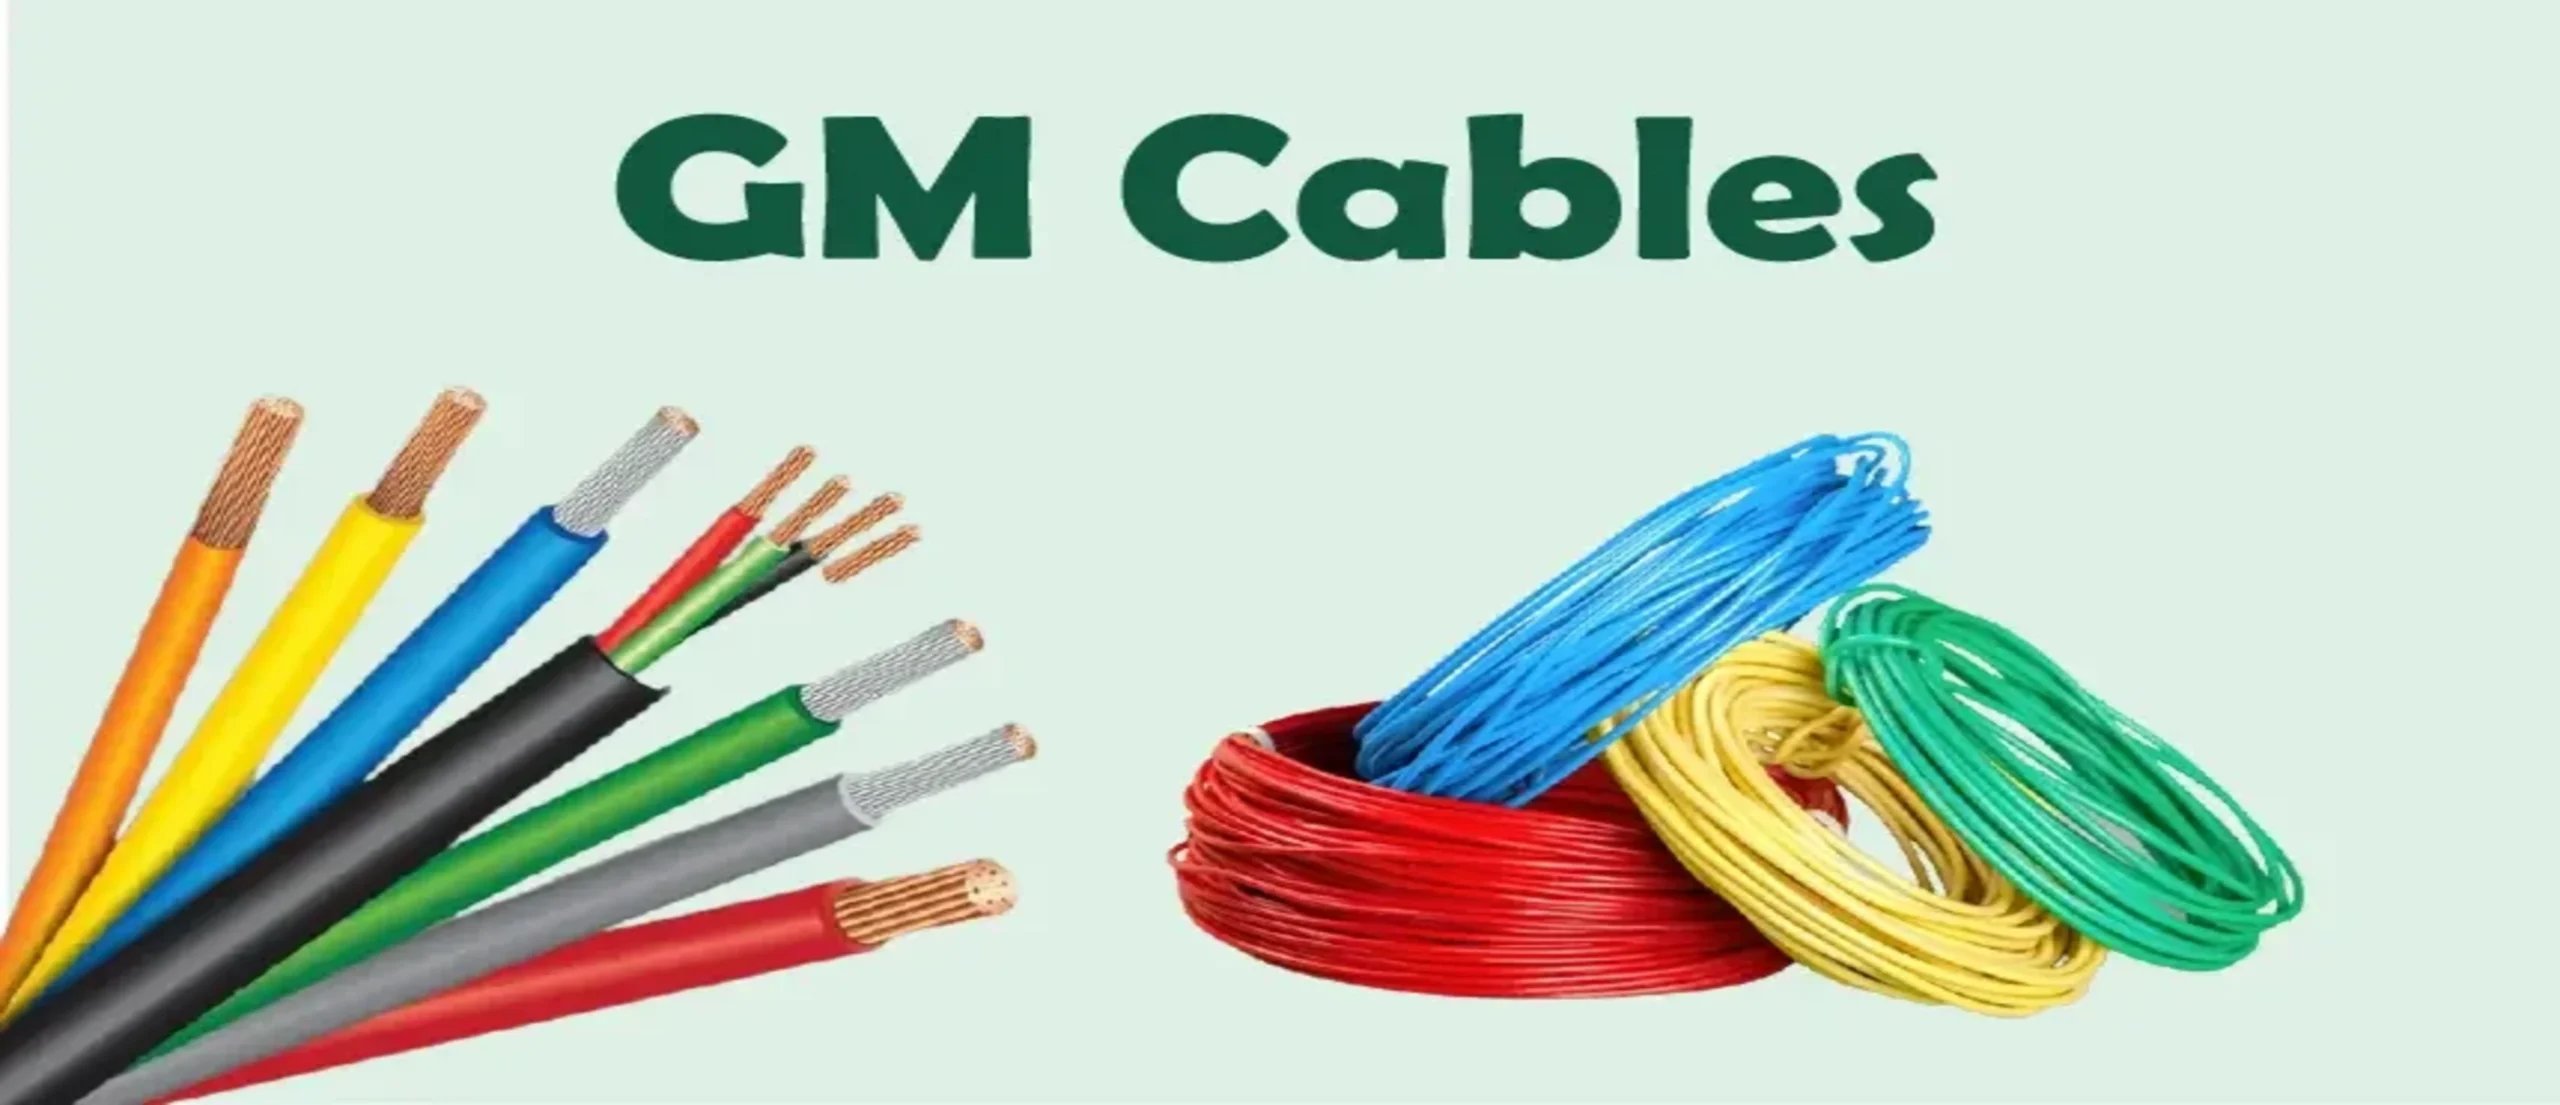 GM cables